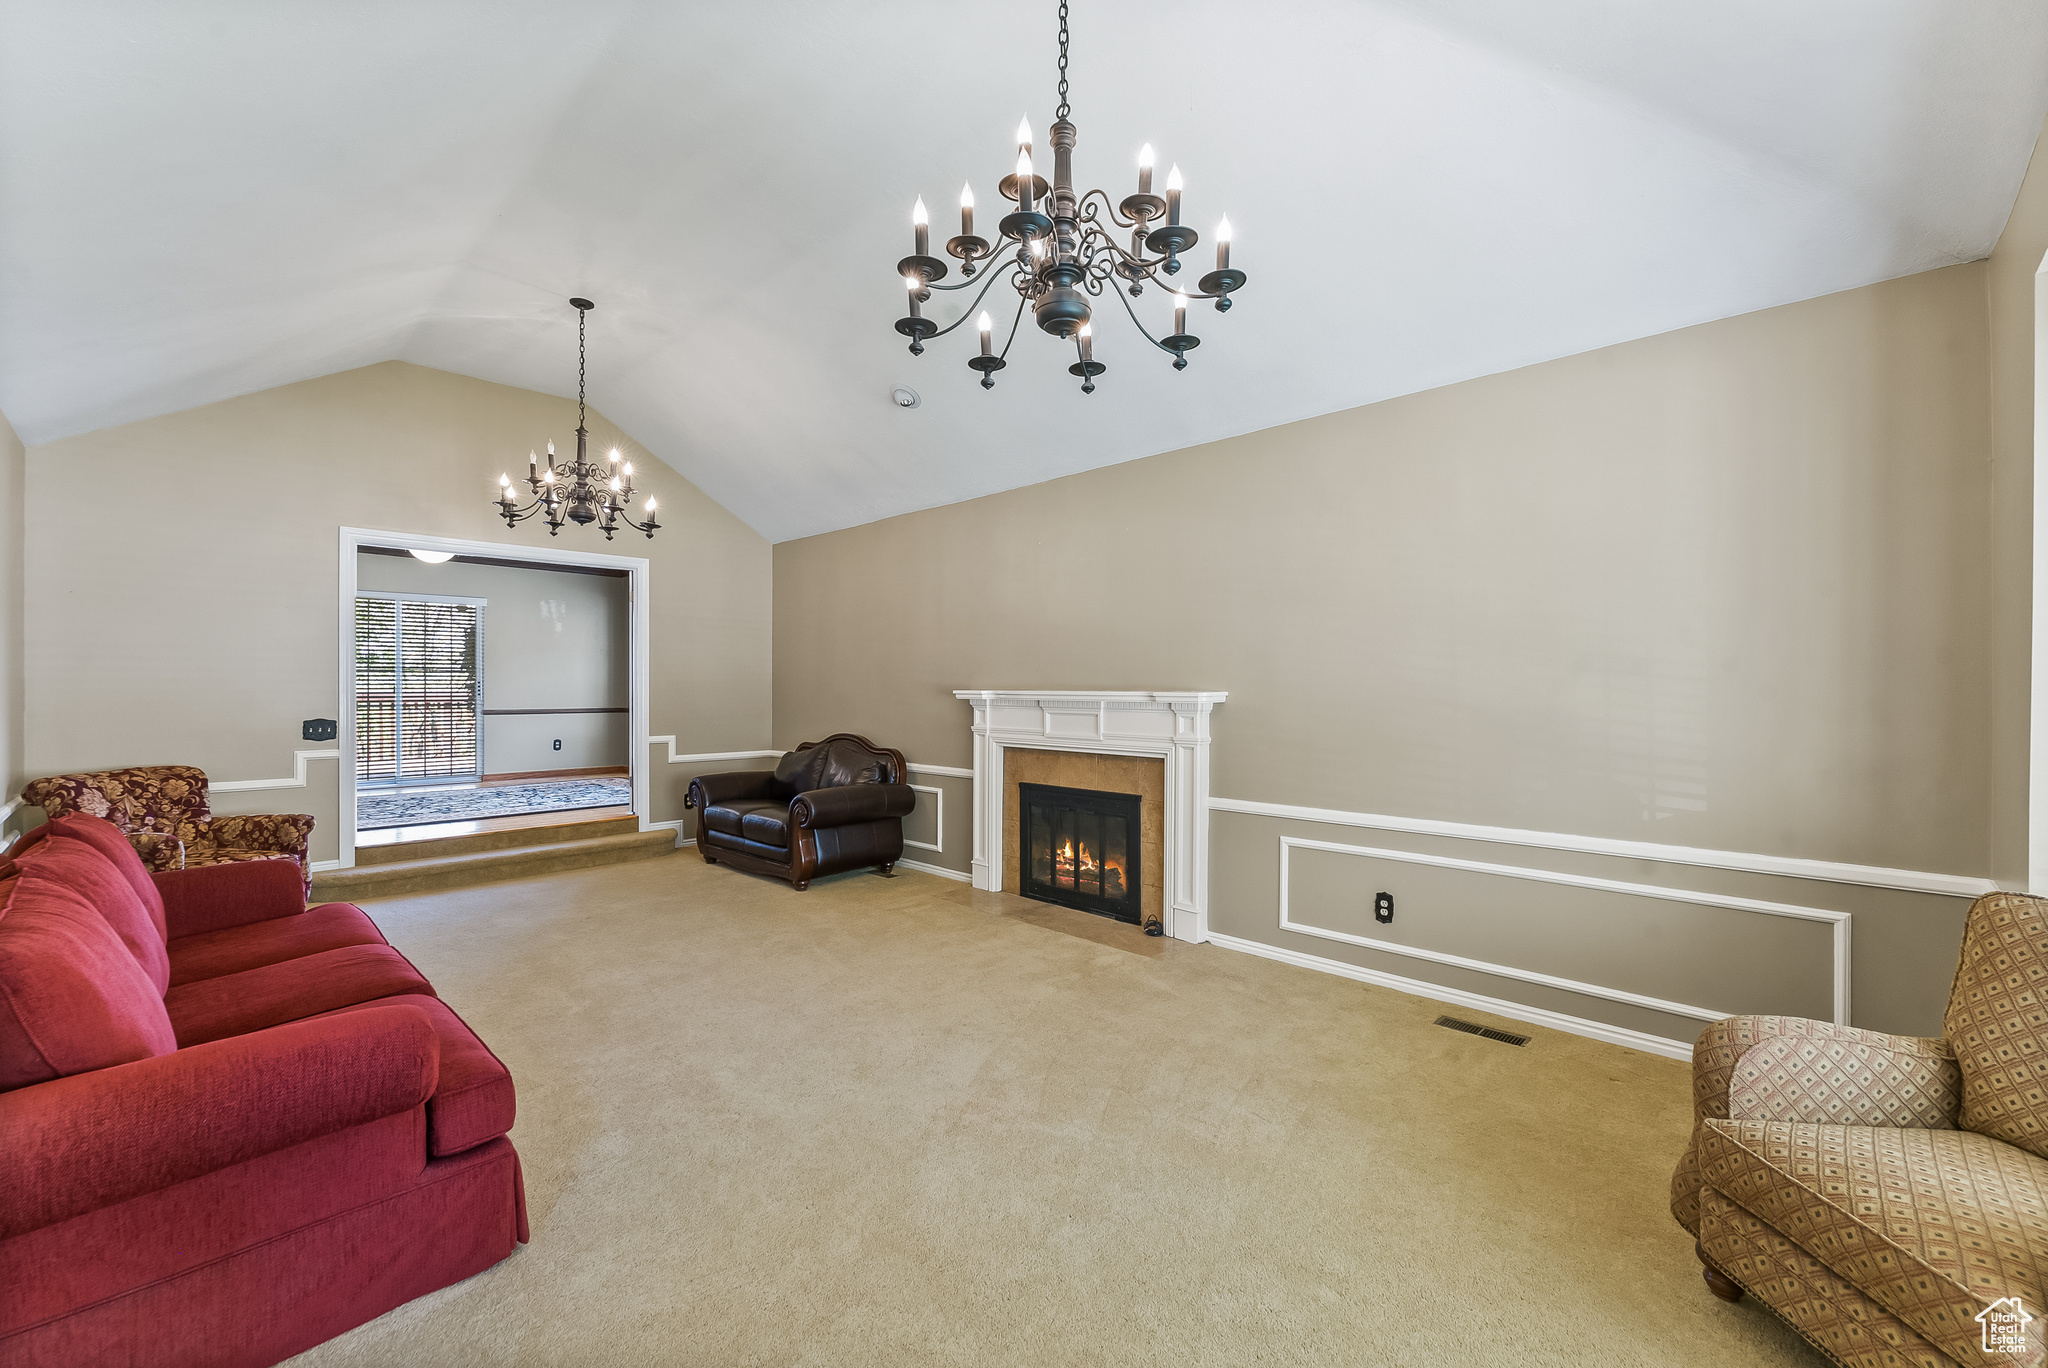 Formal living room with vaulted ceilings and fireplace